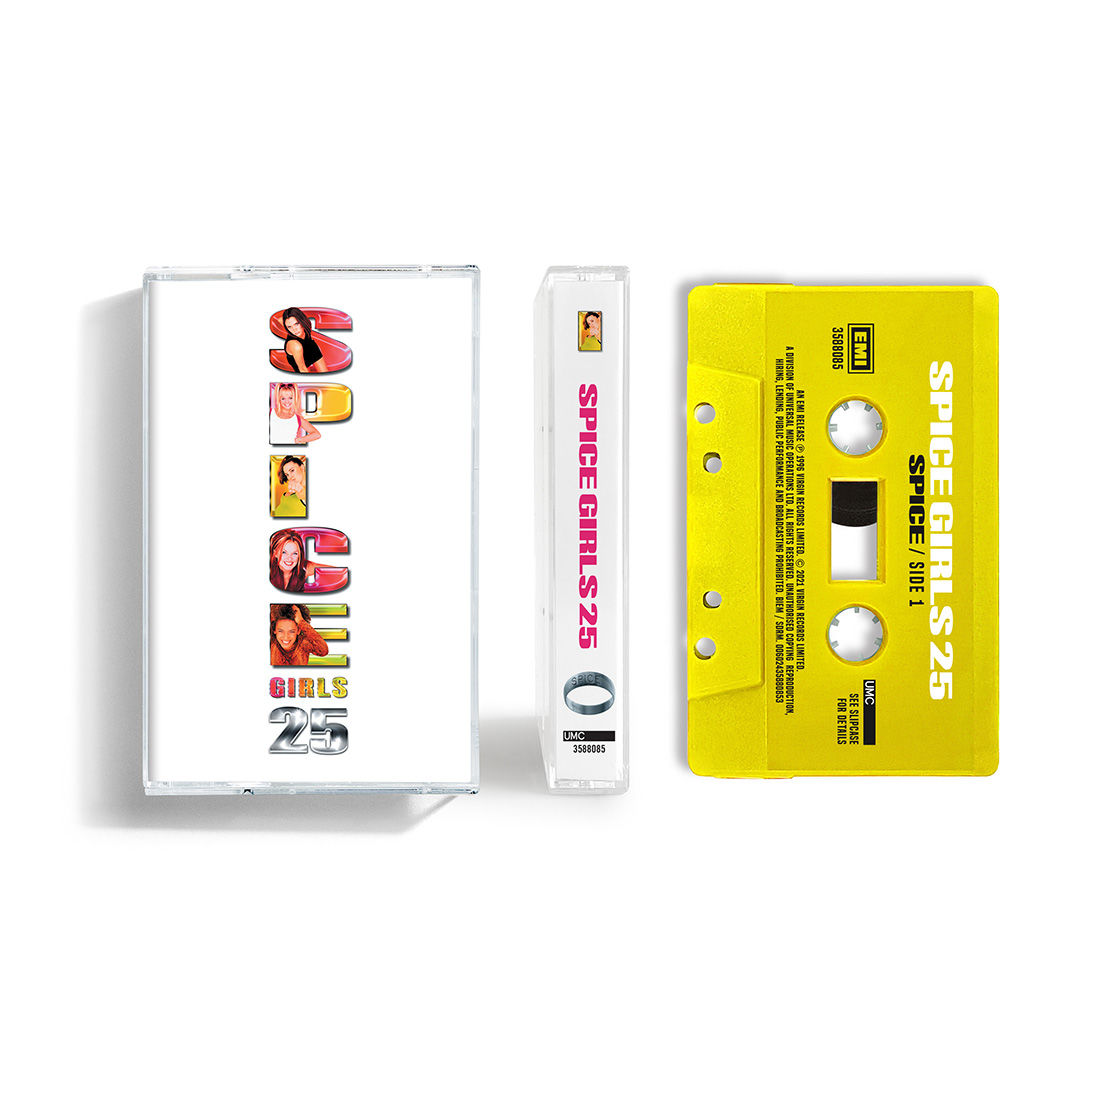 Spice Girls - Spice - 25th Anniversary: (‘Sporty’ Yellow Coloured) Cassette